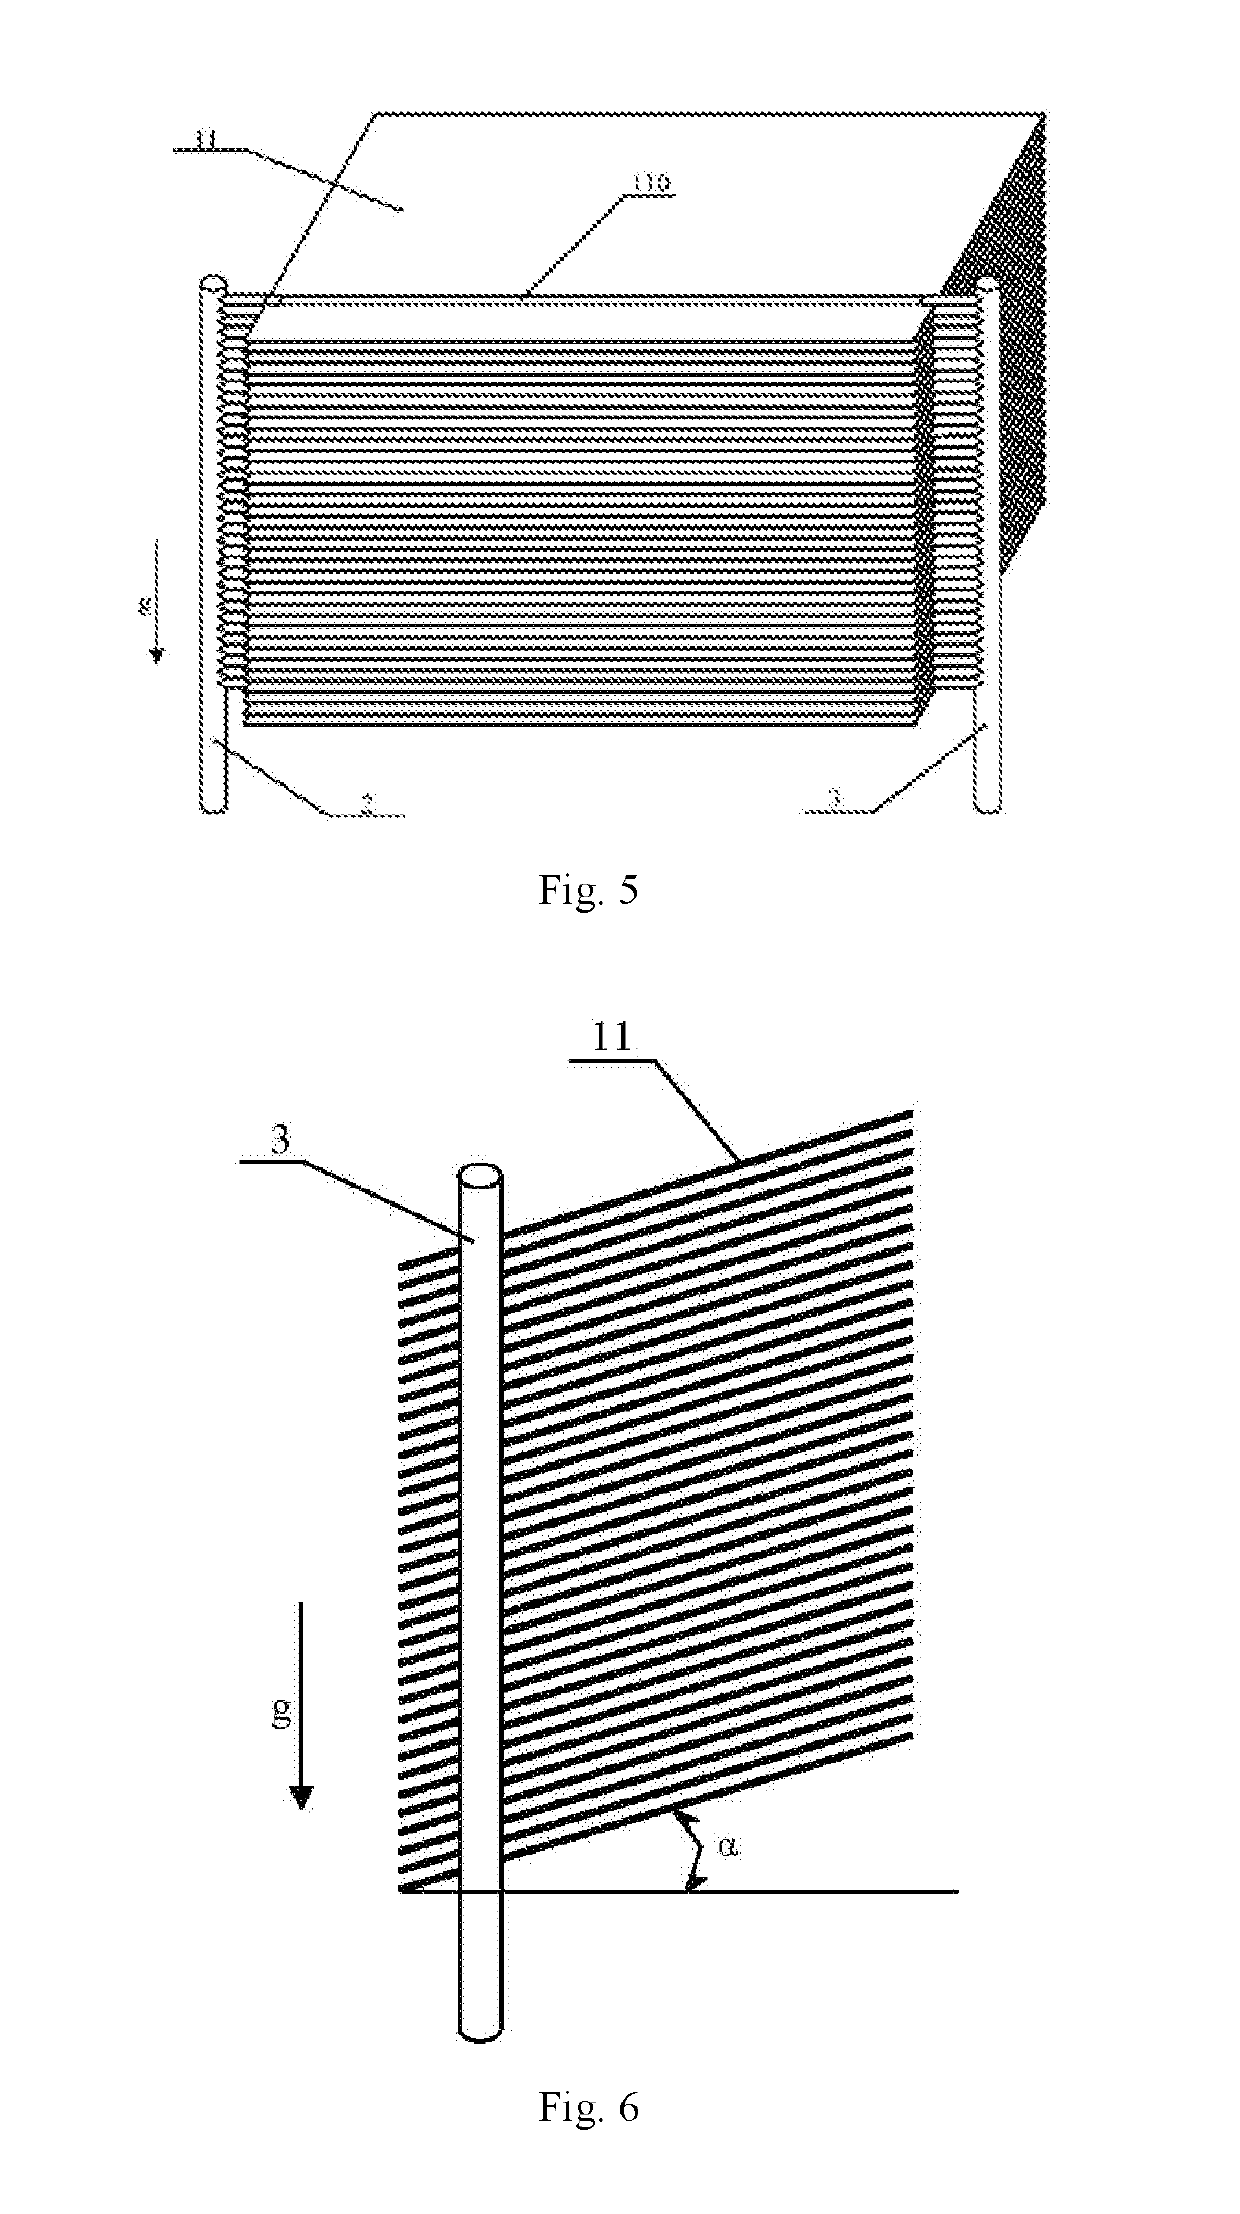 Phase transition suppression heat transfer plate-based heat exchanger